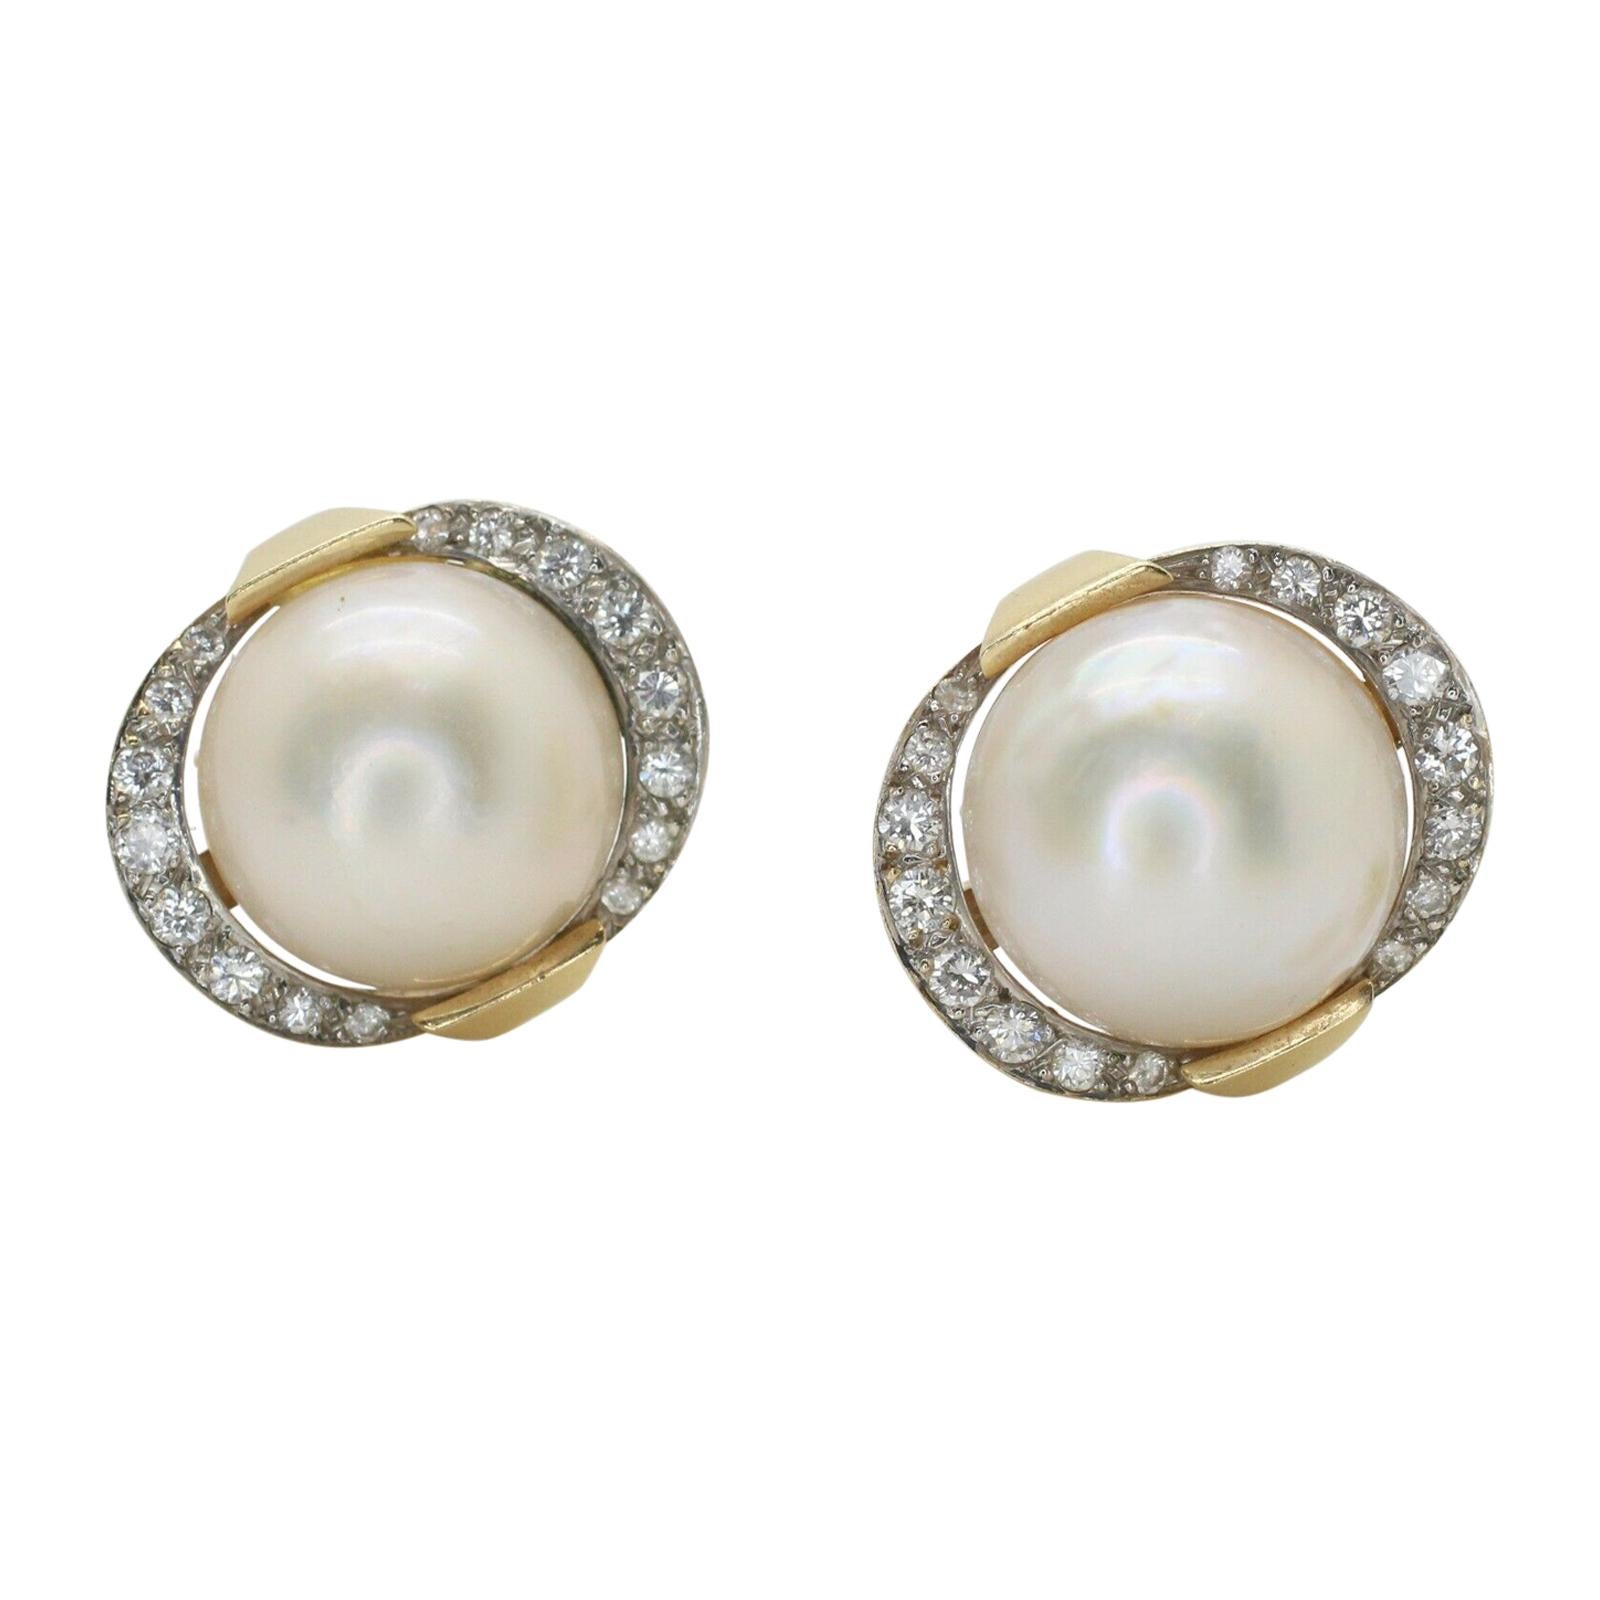 14k Yellow Gold Mabe Pearl and Diamond Earrings